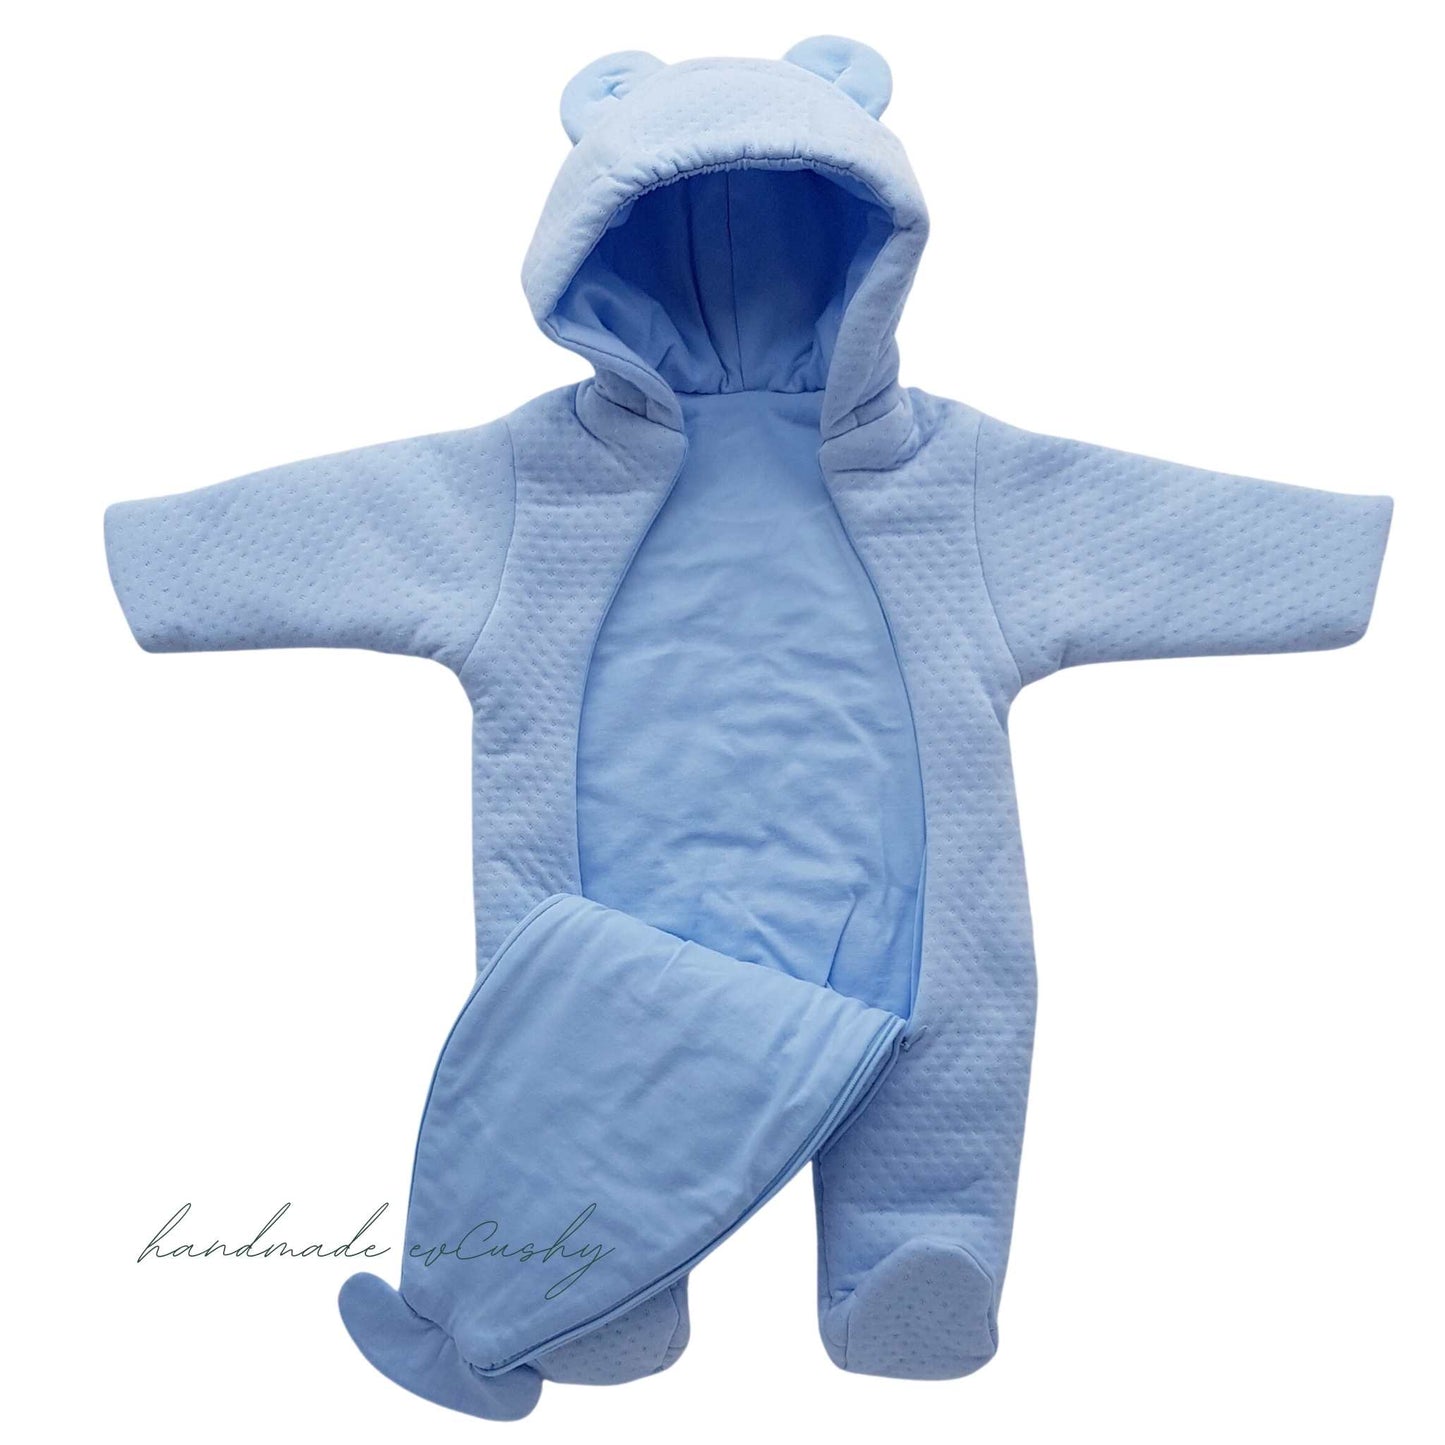 baby warm pram suit blue with hood with little teddy ears